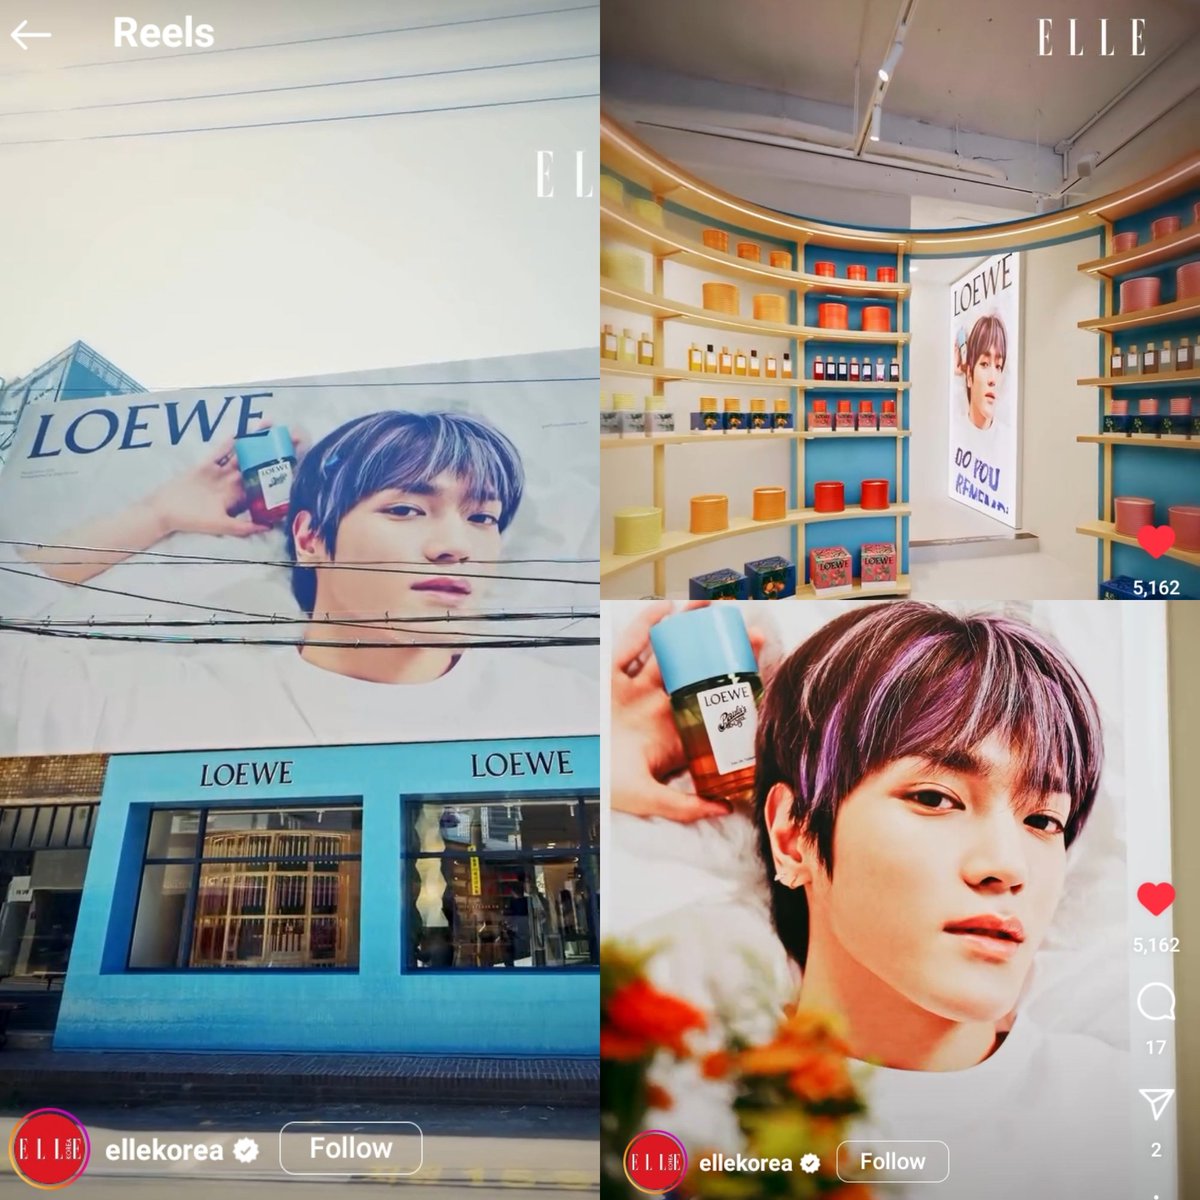 ELLE KOREA Instagram reel #TAEYONG ➫instagram.com/reel/C653FQQLL… 📍Loewe Perfumes 1st pop-up store in Seongsu , South Korea #태용 is fronting and the solo face for Paula's Ibiza 2024 perfumes campaign ☆ #LOEWEPerfumes #LOEWEpaulas #LOEWE #LOEWETAEYONG